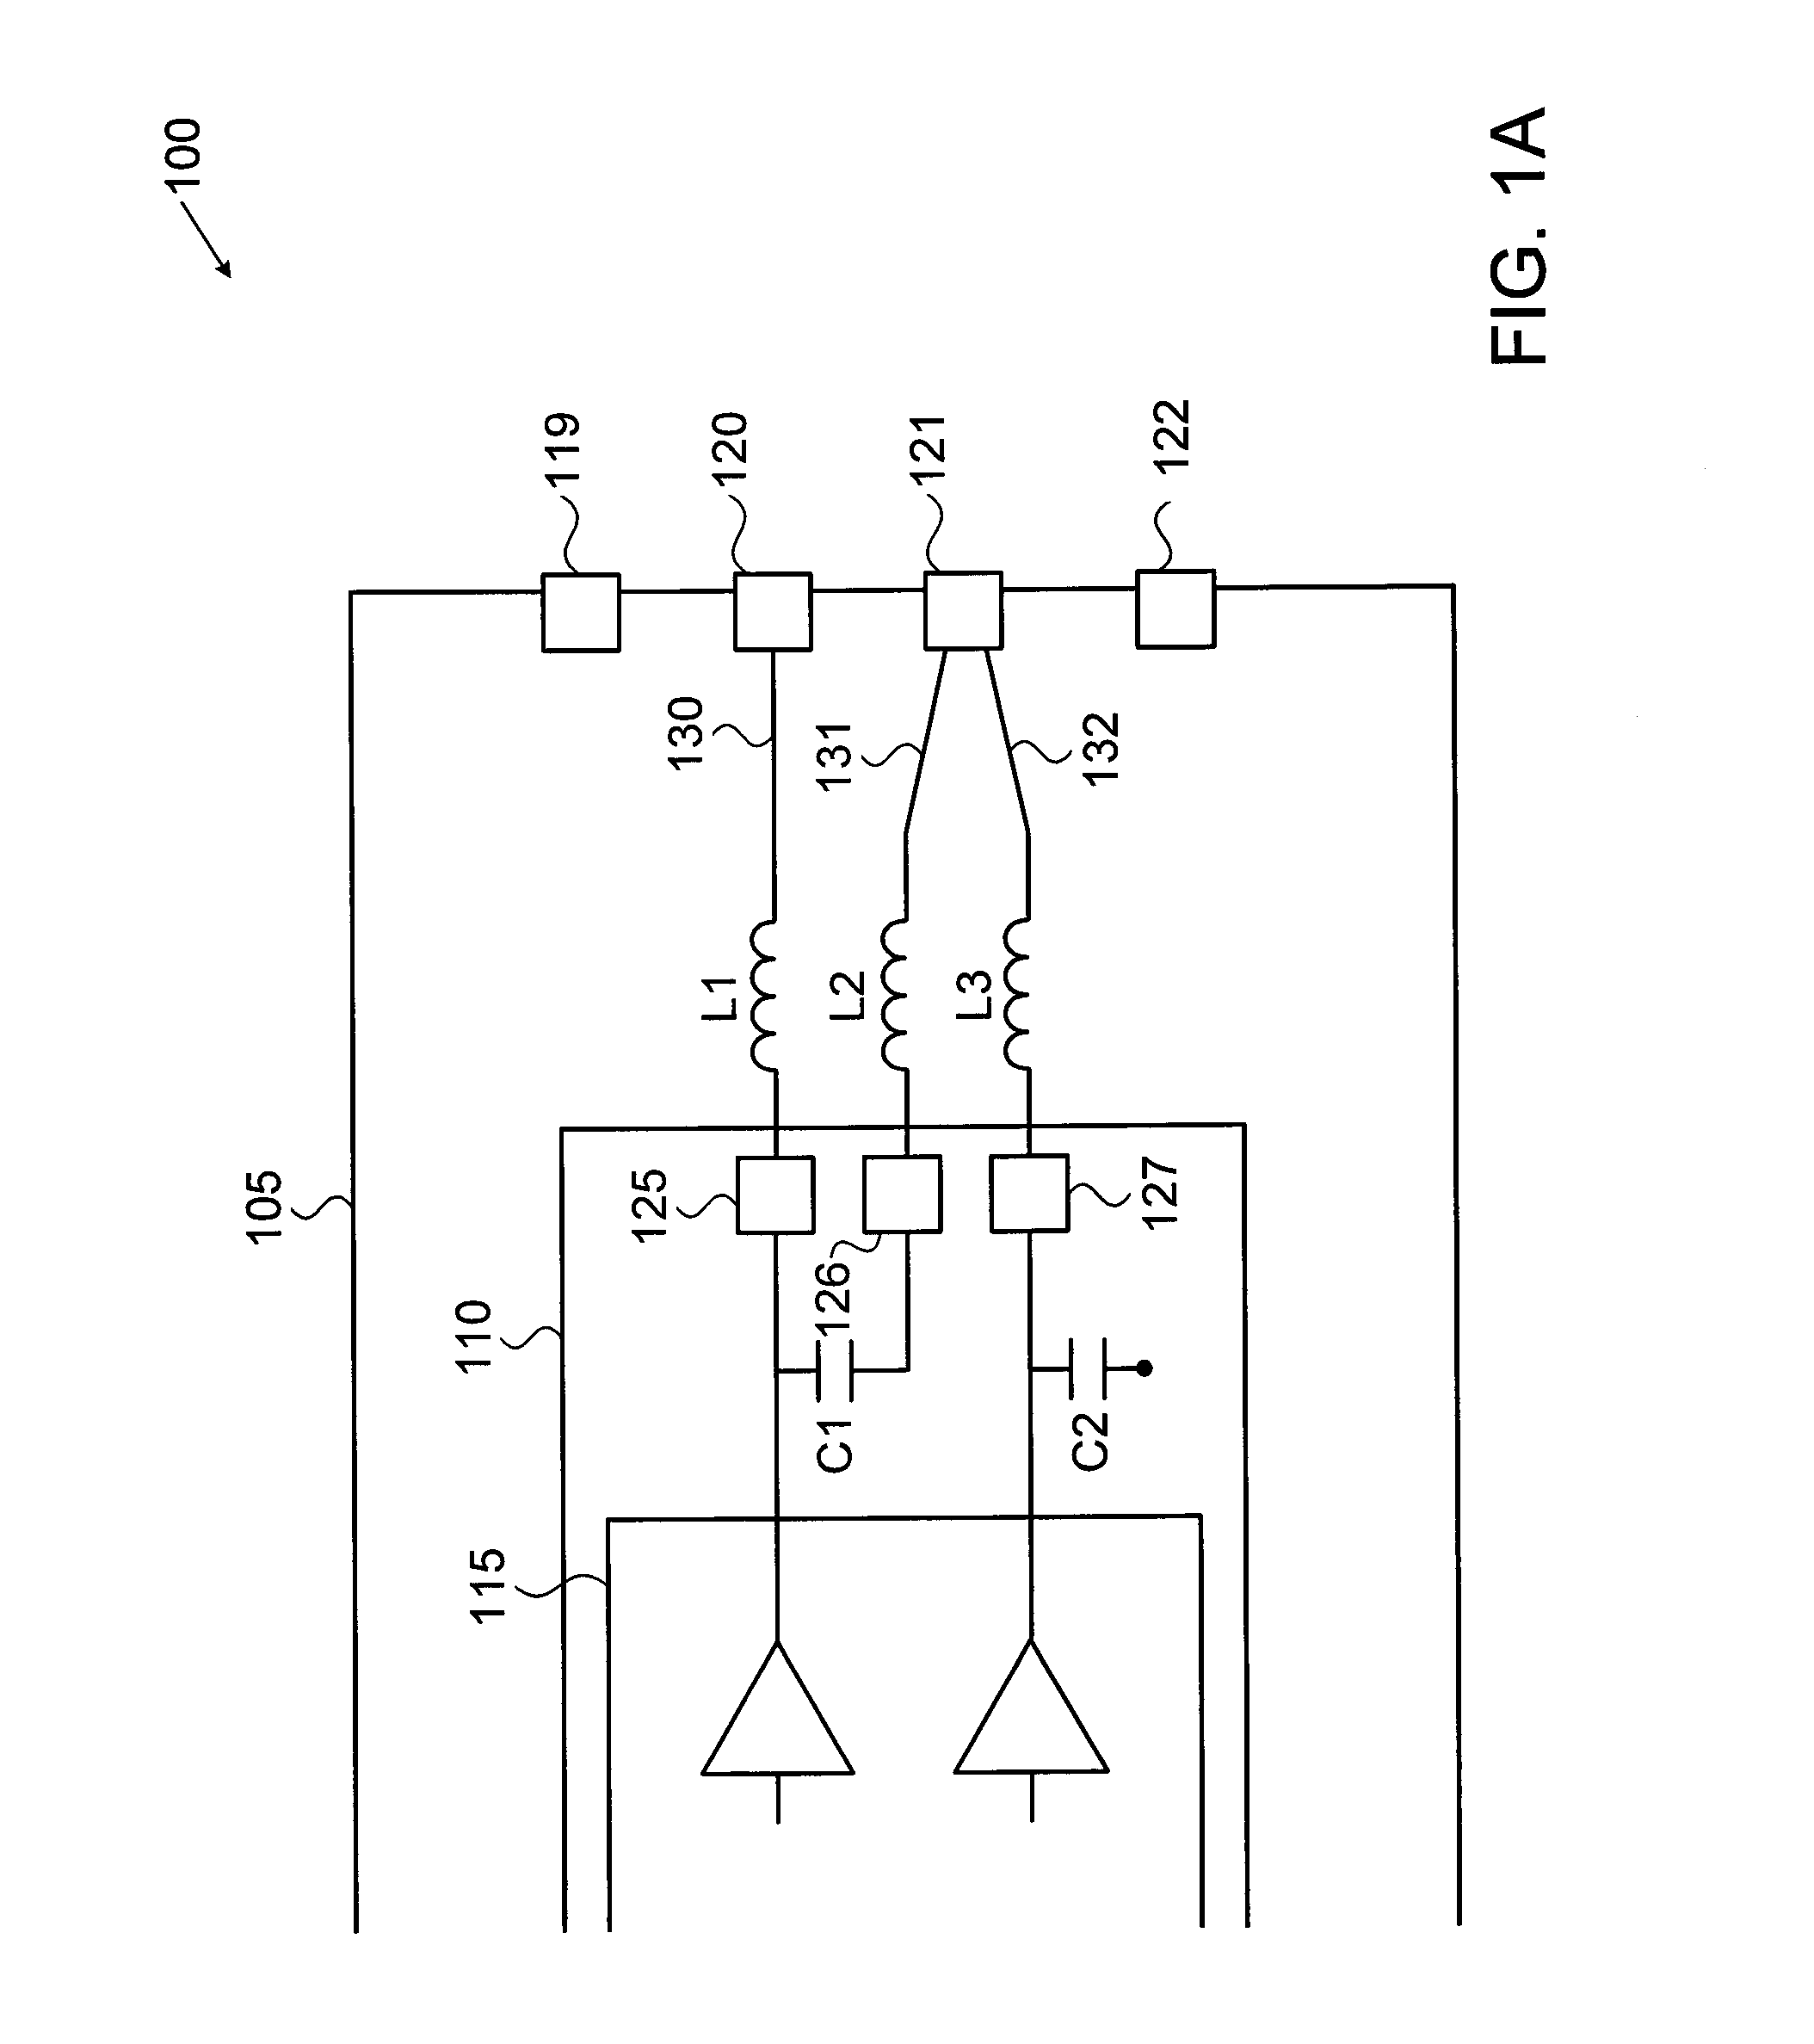 Integrated circuit including a differential power amplifier with a single ended output and an integrated balun